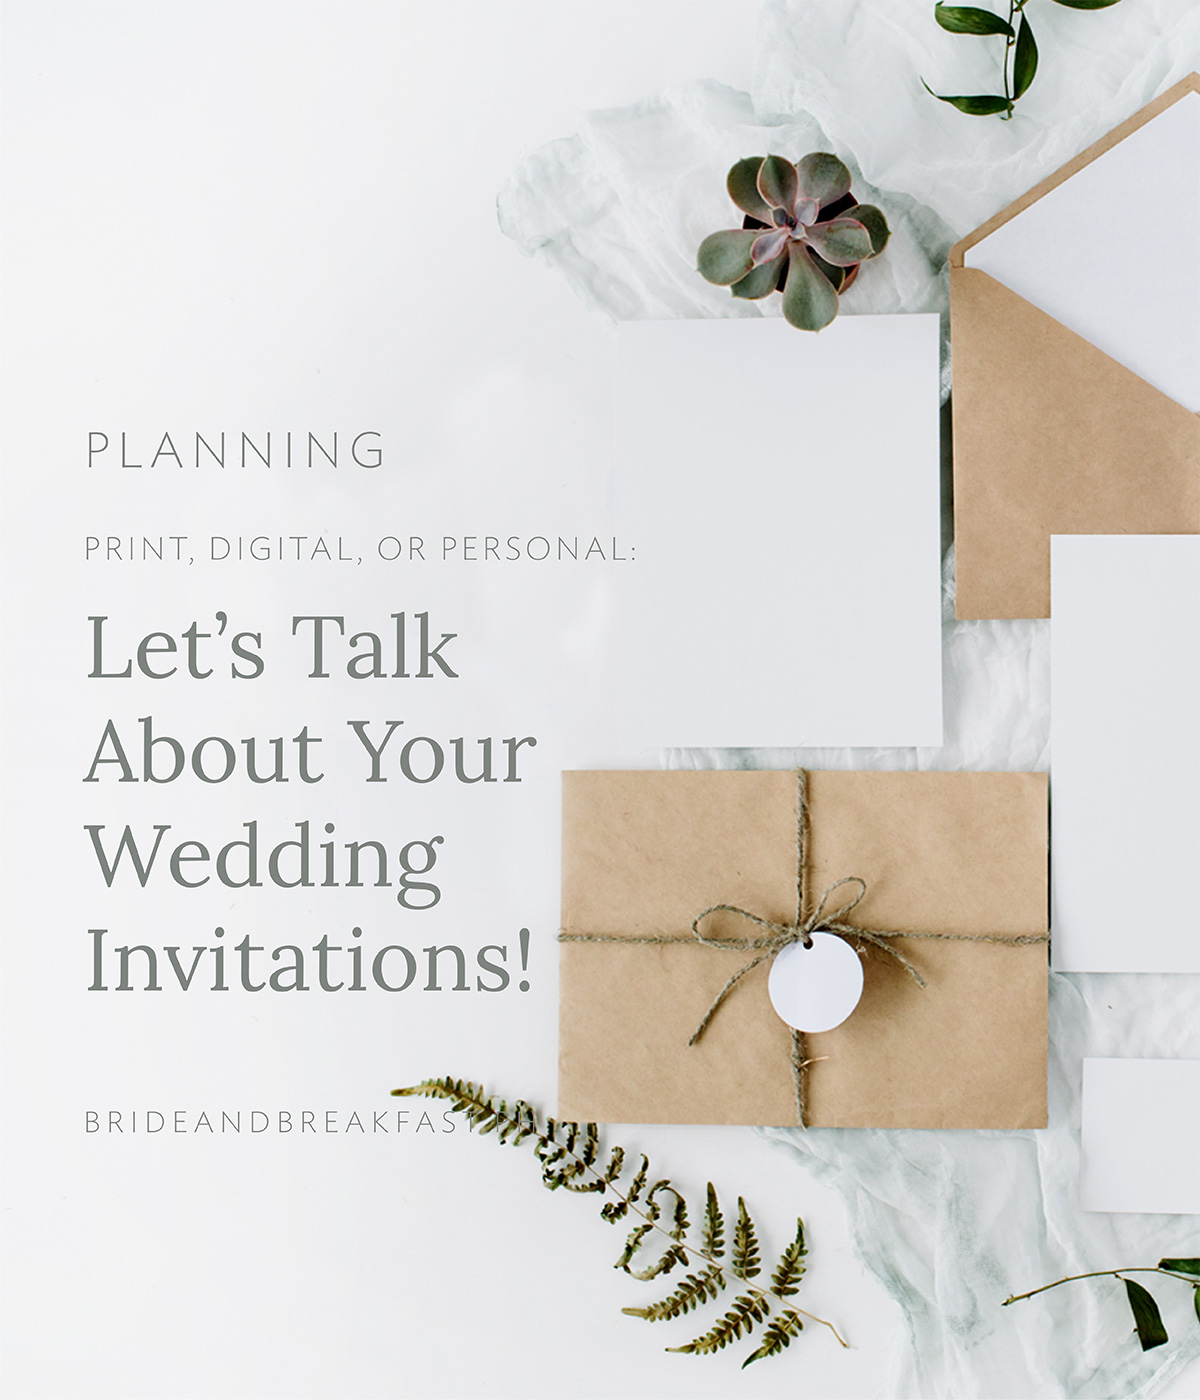 Print, Digital, or Personal: Let’s Talk About Your Wedding Invitations!